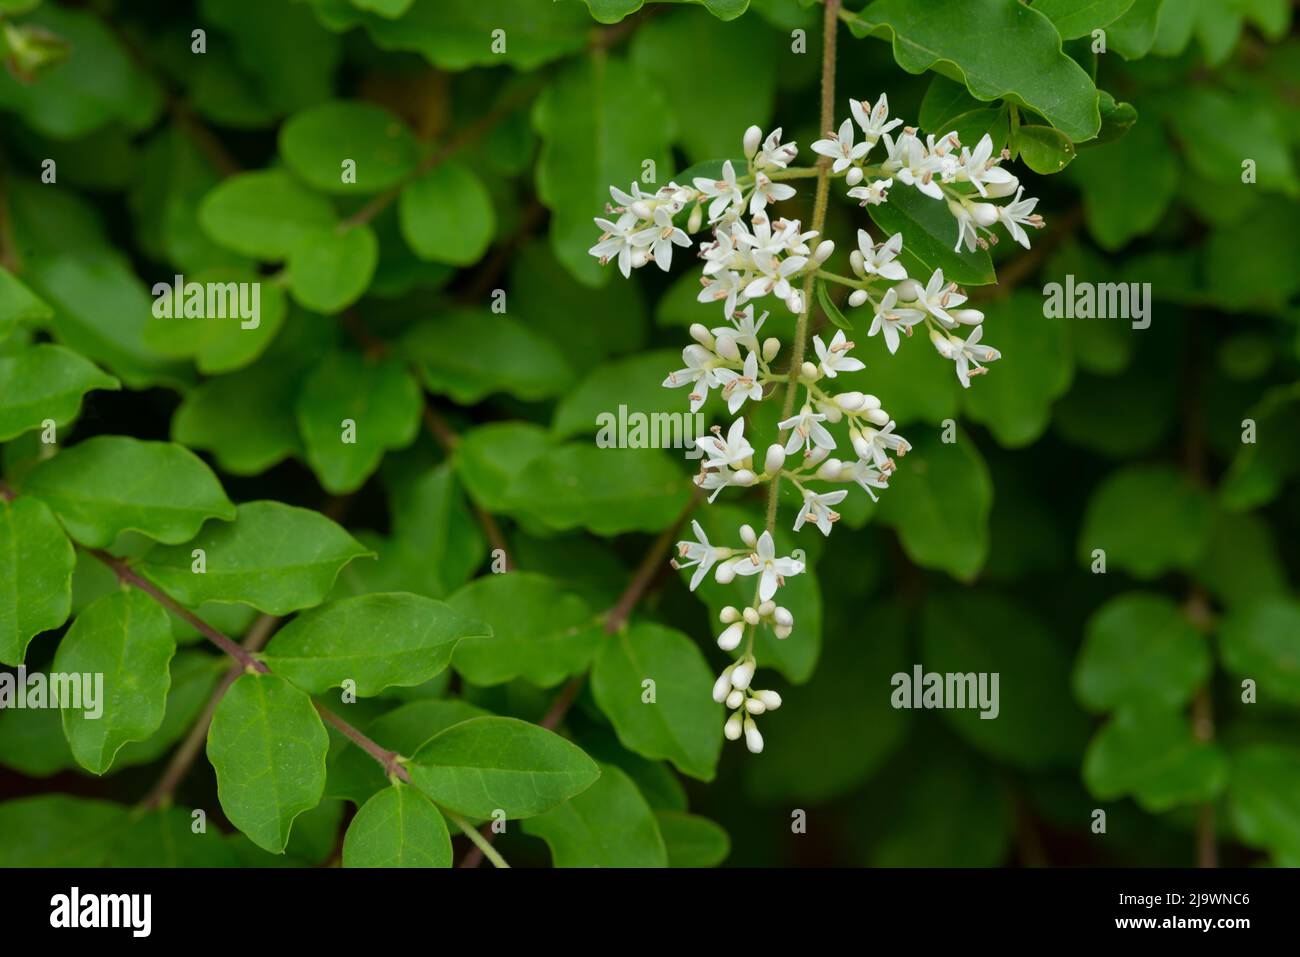 Italy, Lombardy, Chinese Privet Flowers, Ligustrum Sinense Stock Photo